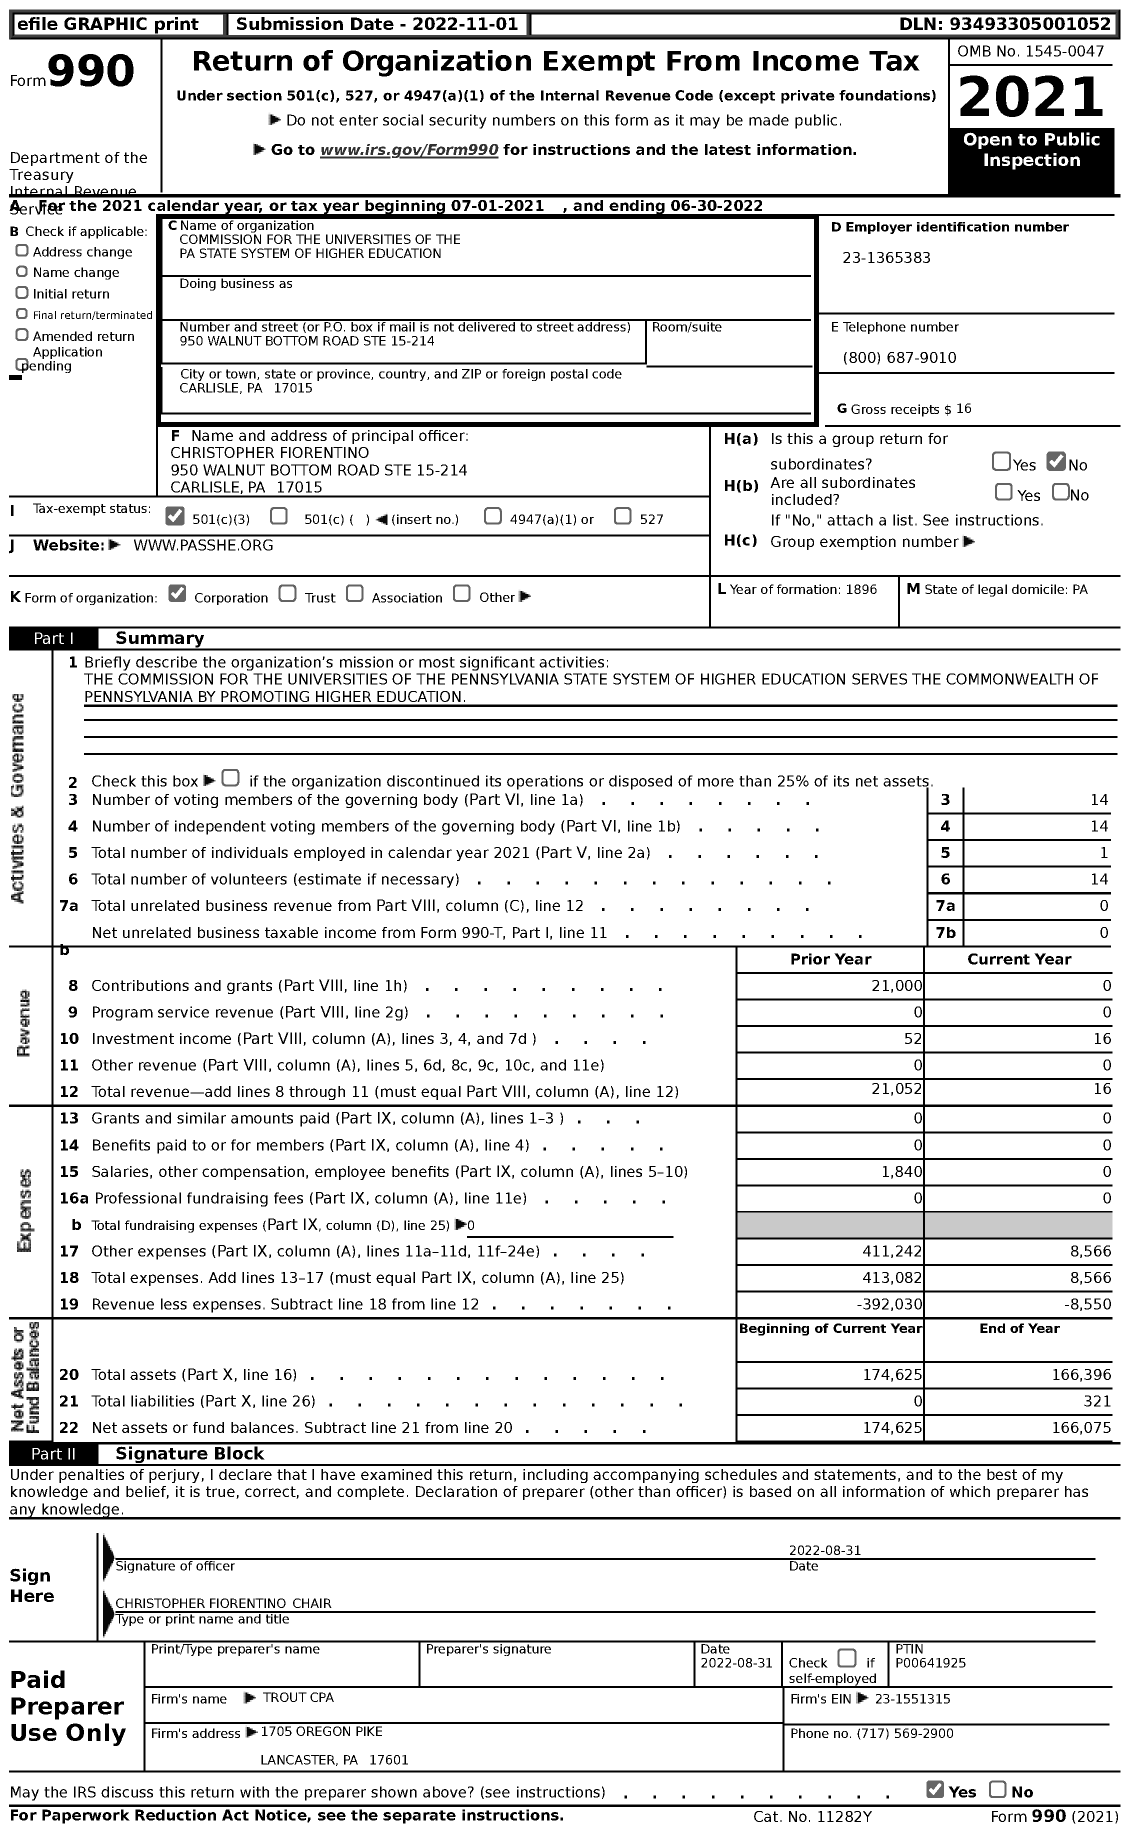 Image of first page of 2021 Form 990 for Commission for the Universities of the Pa State System of Higher Education